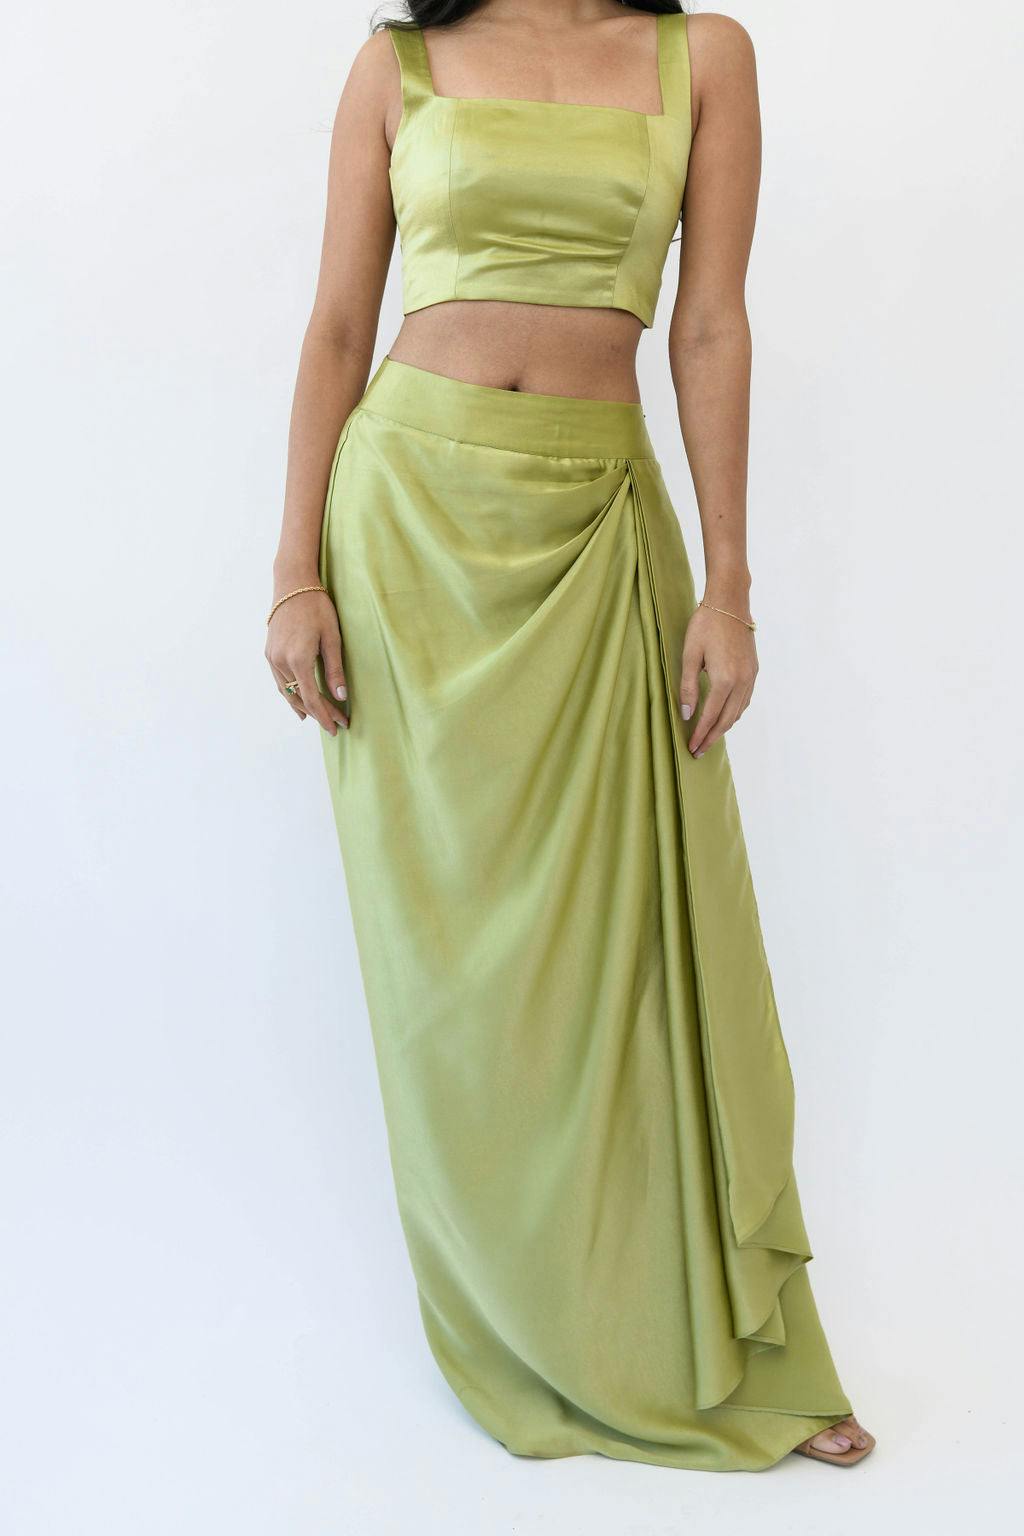 Pista Green Satin Drape Skirt, a product by MOR Collections